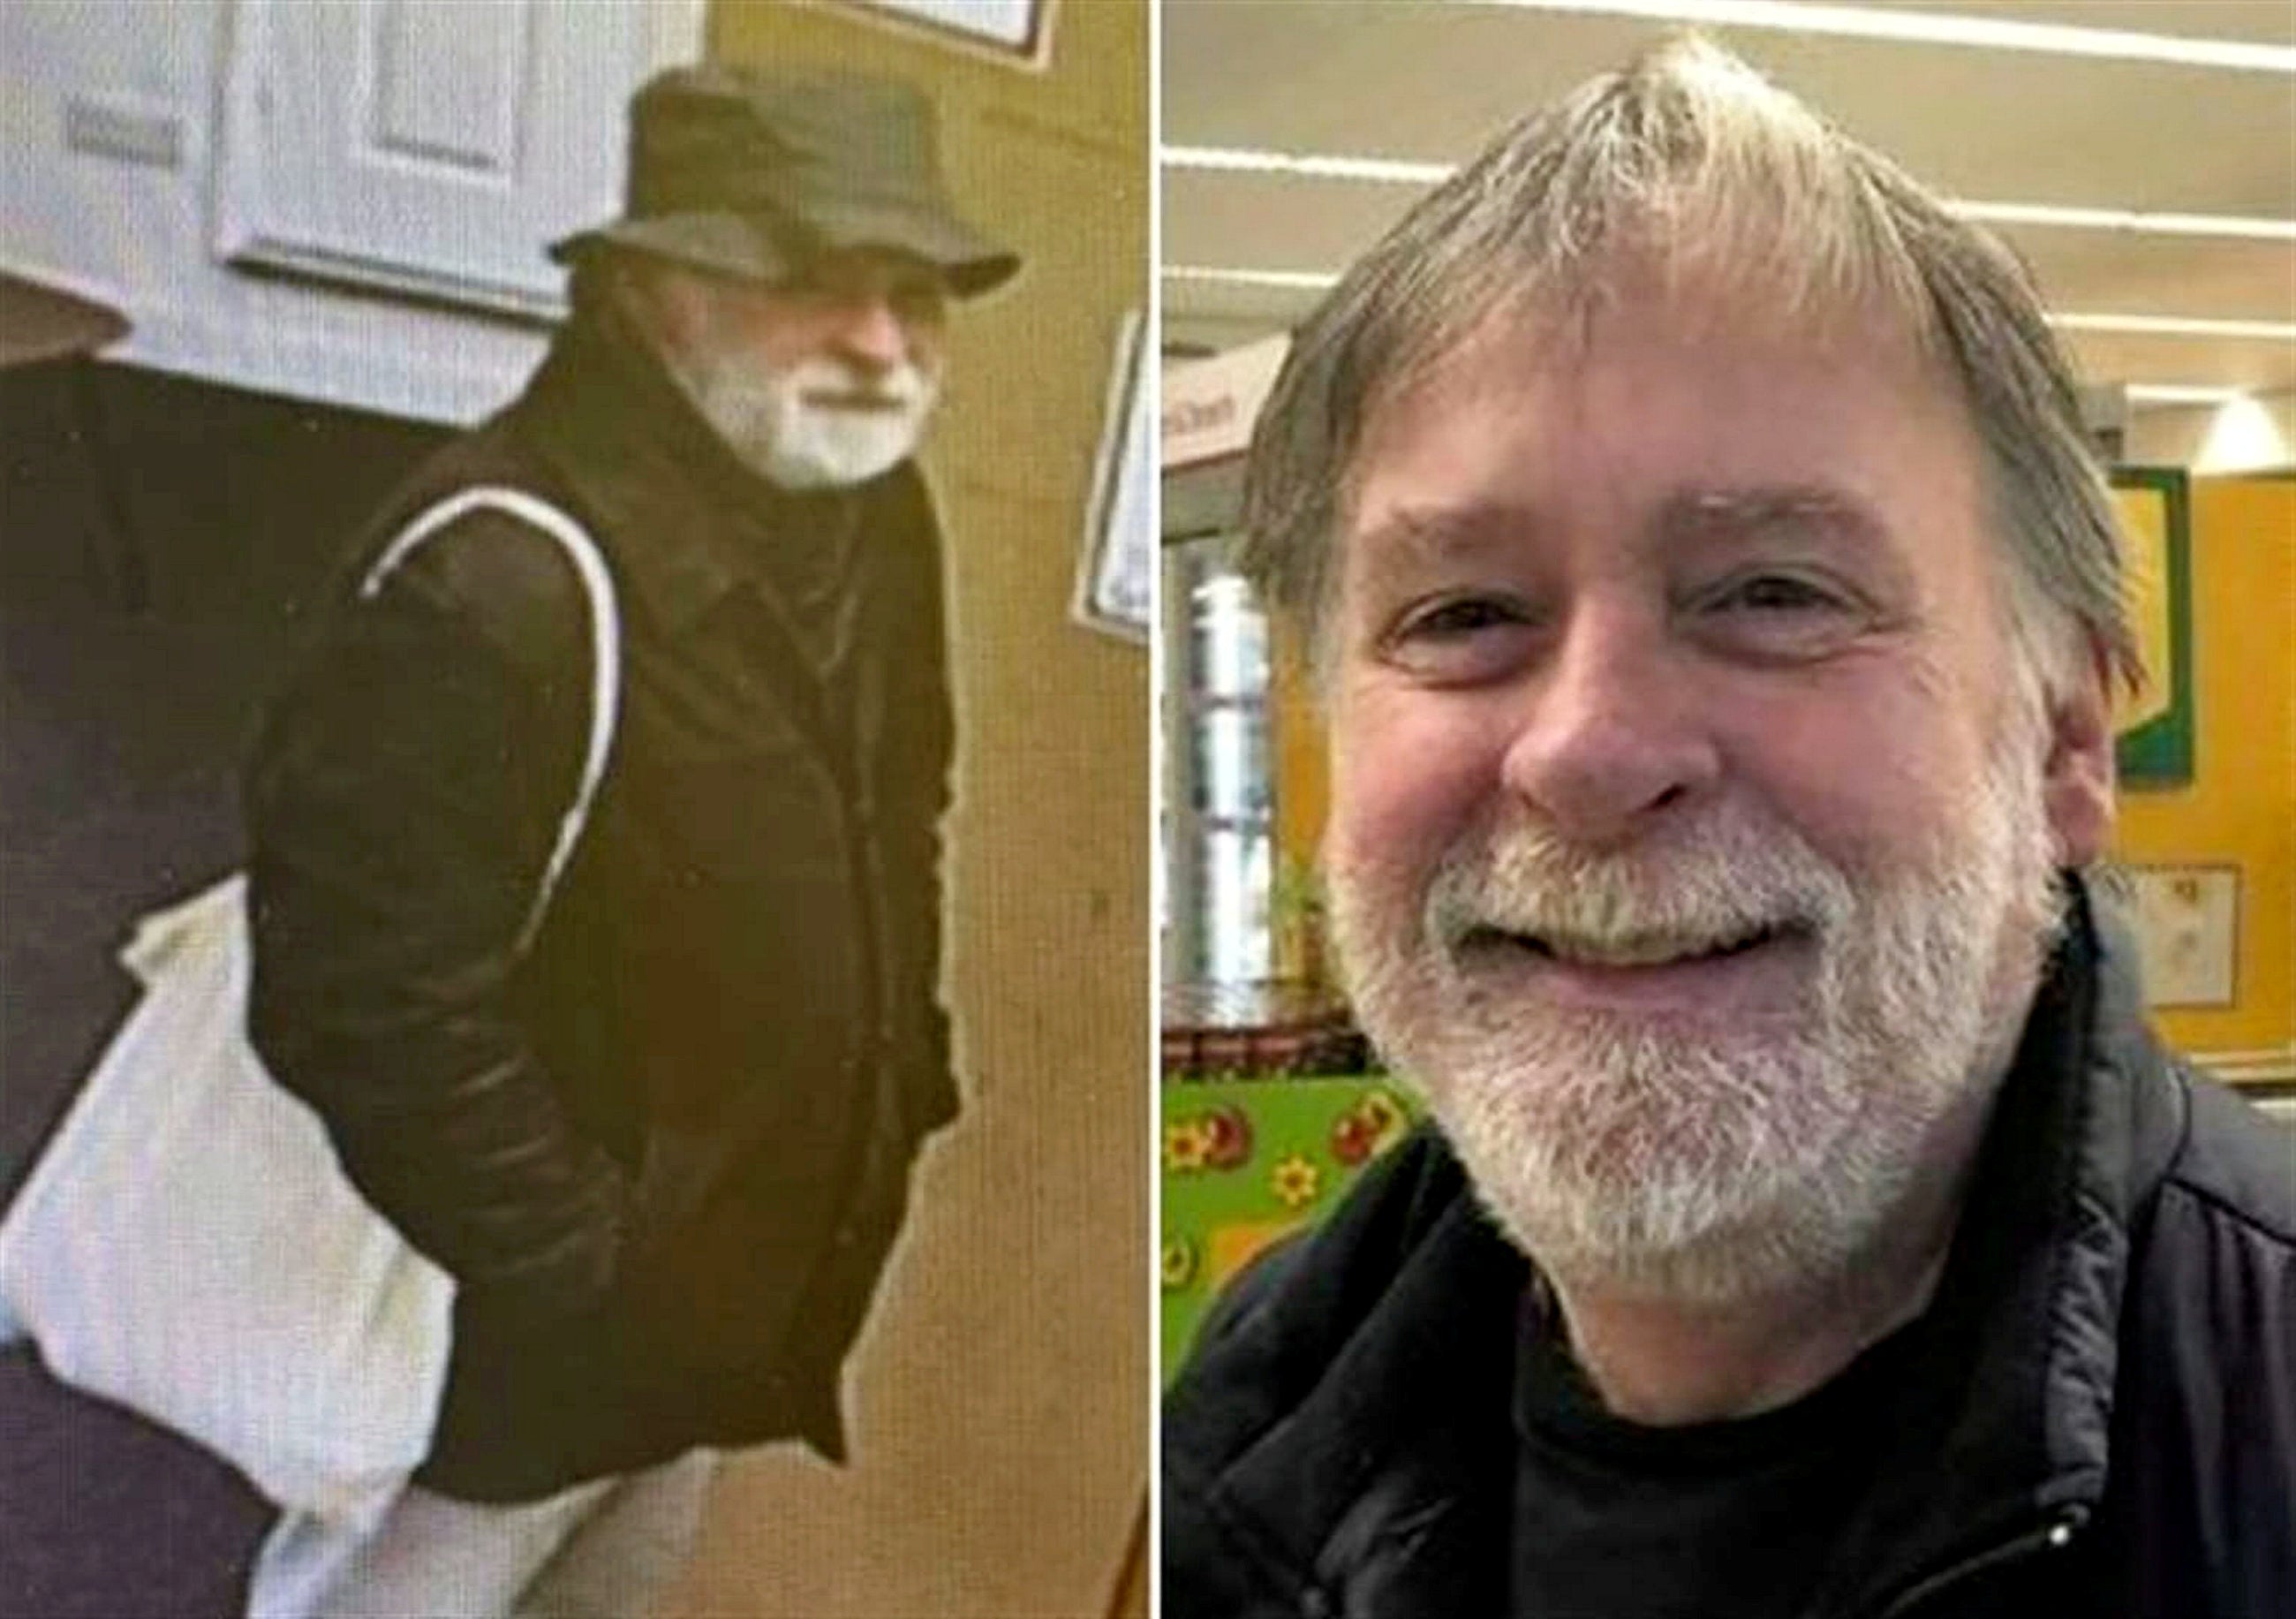 Mark Bishop went missing from the Newark area on January 7